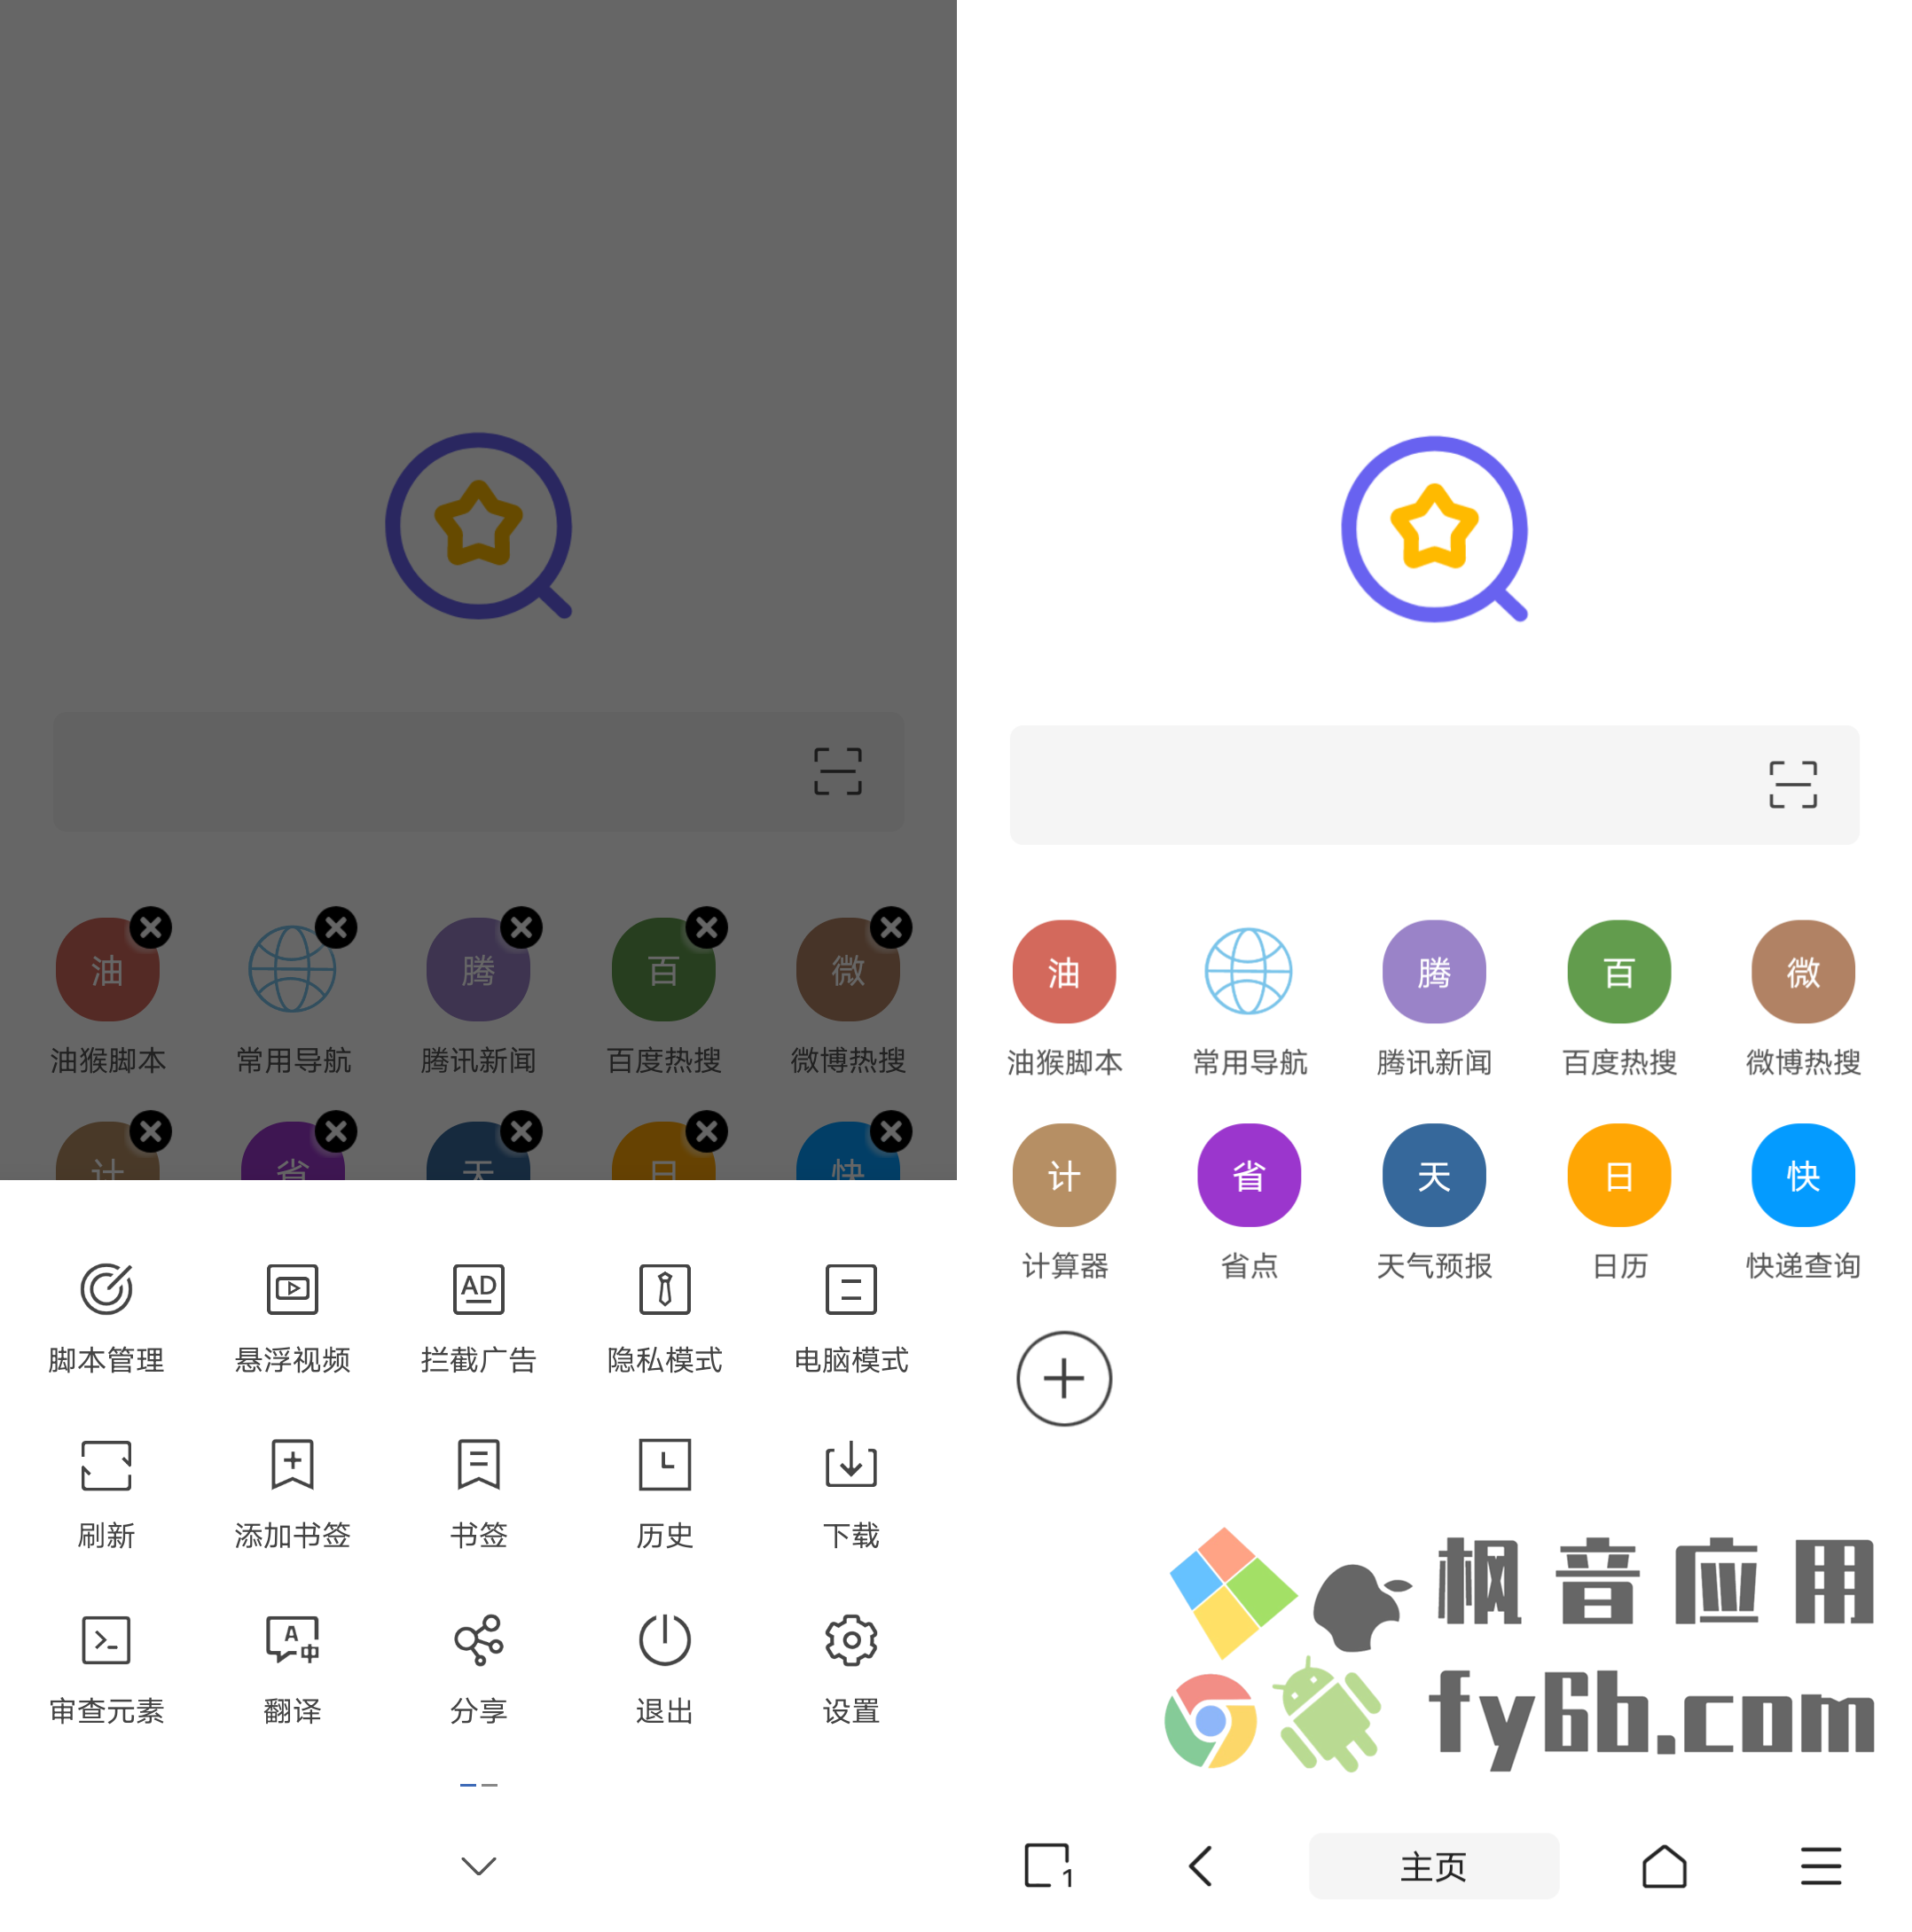 Android 油猴浏览器_5.12.5